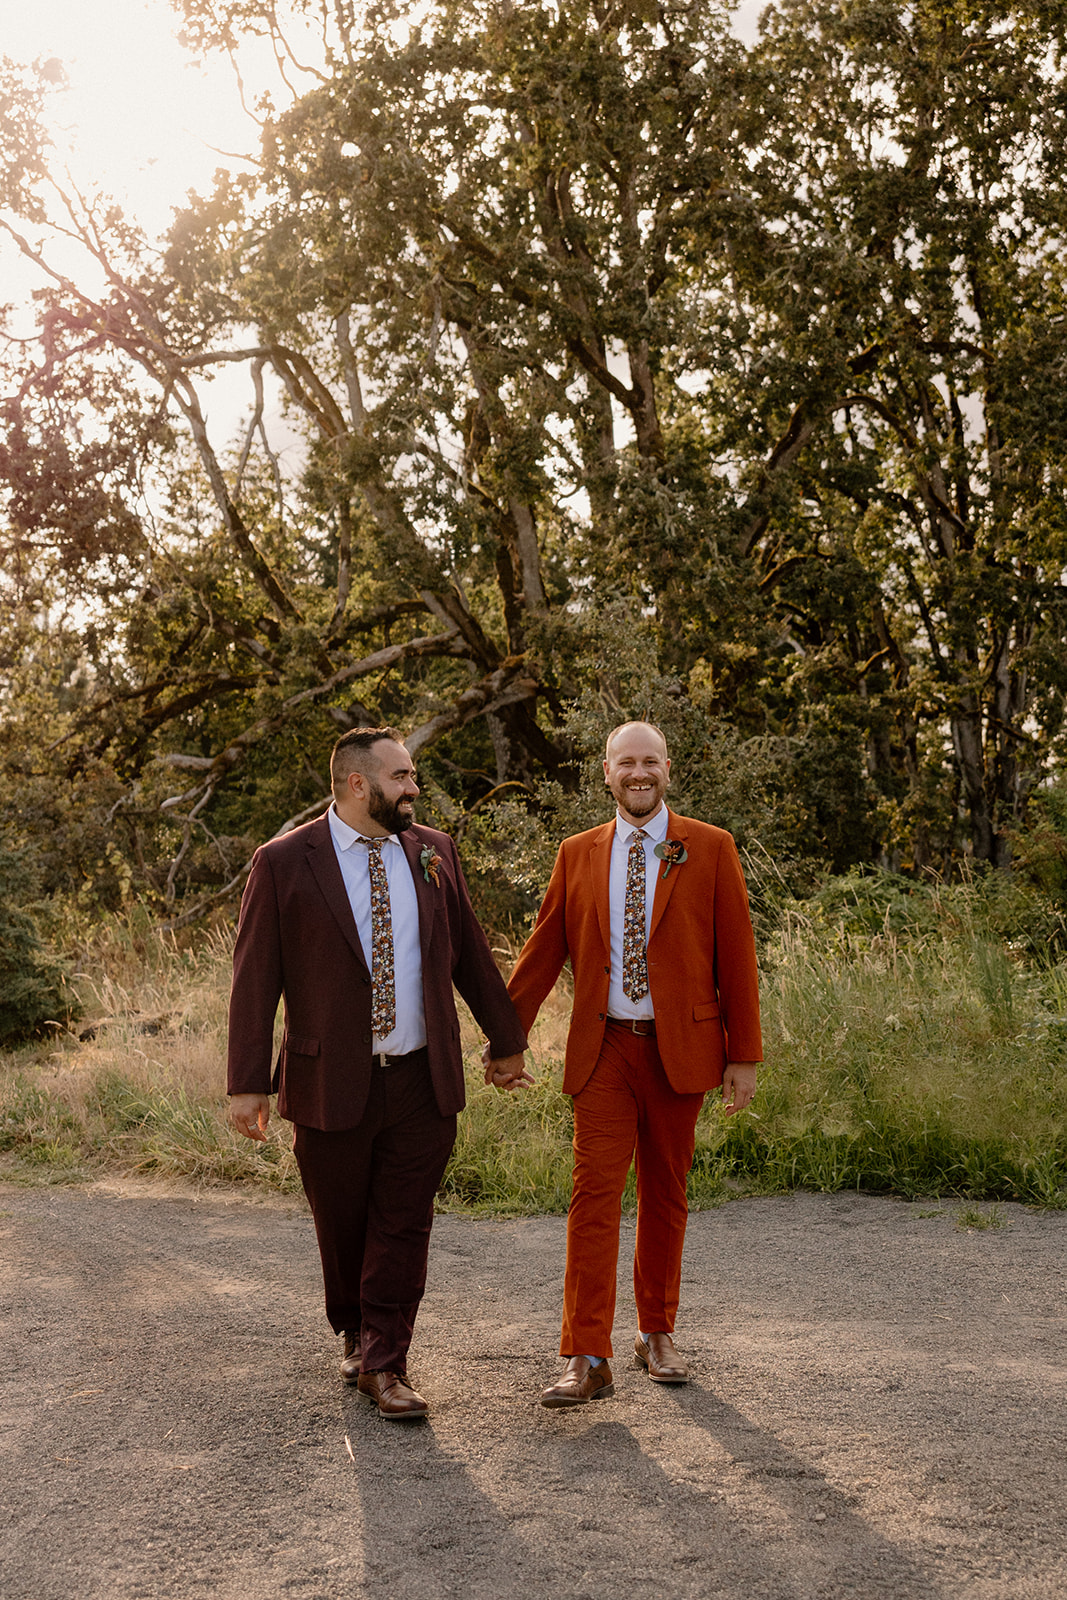 Two grooms posing for photos at sunset at the Oregon Garden.